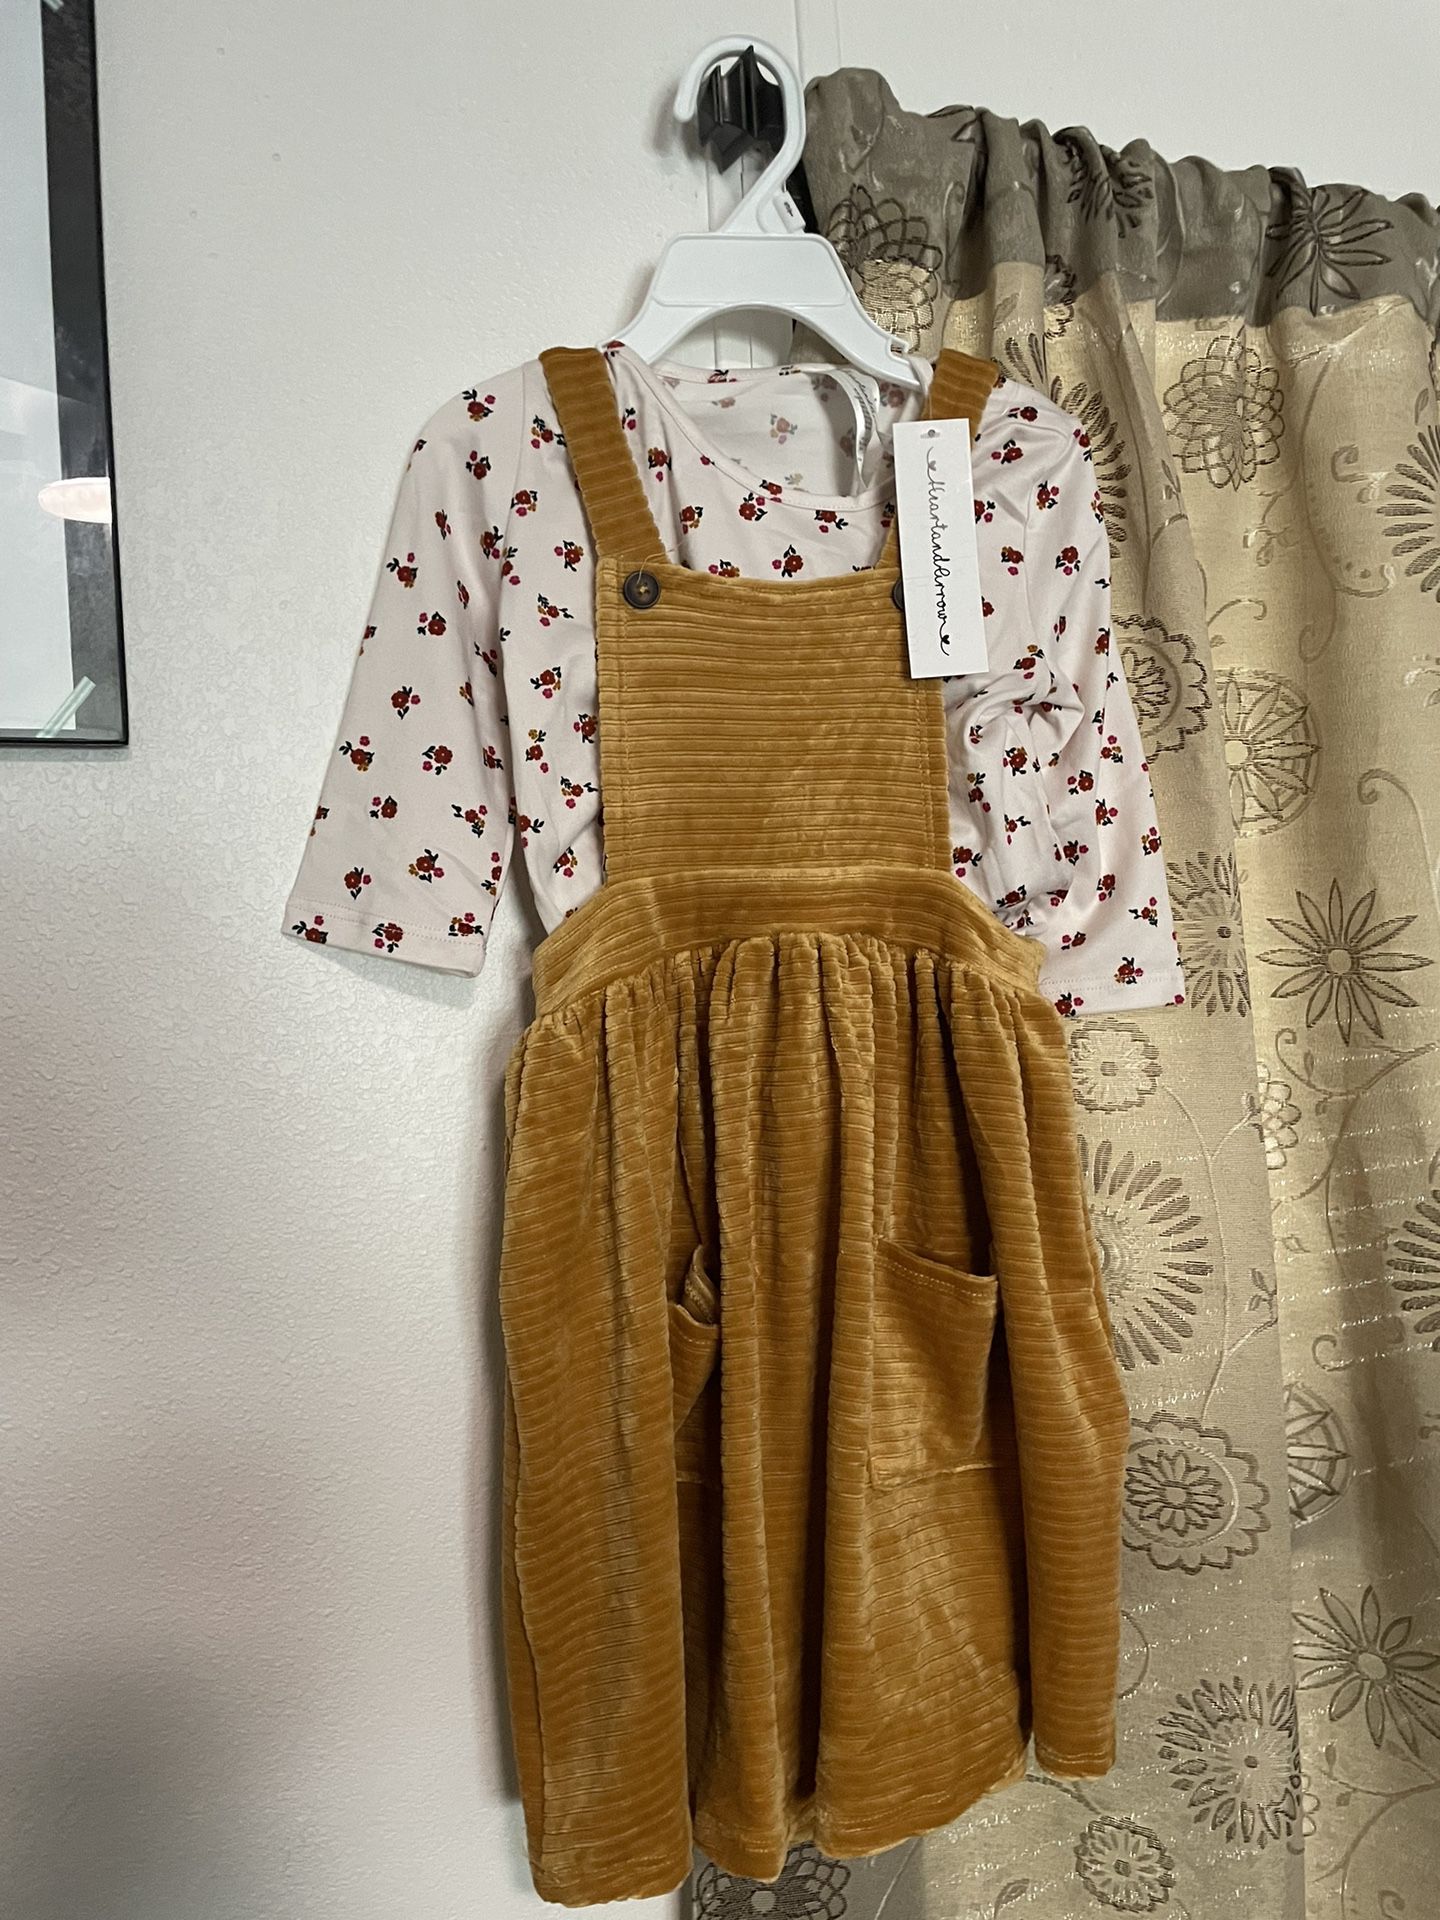 Overall Toddlers Dress